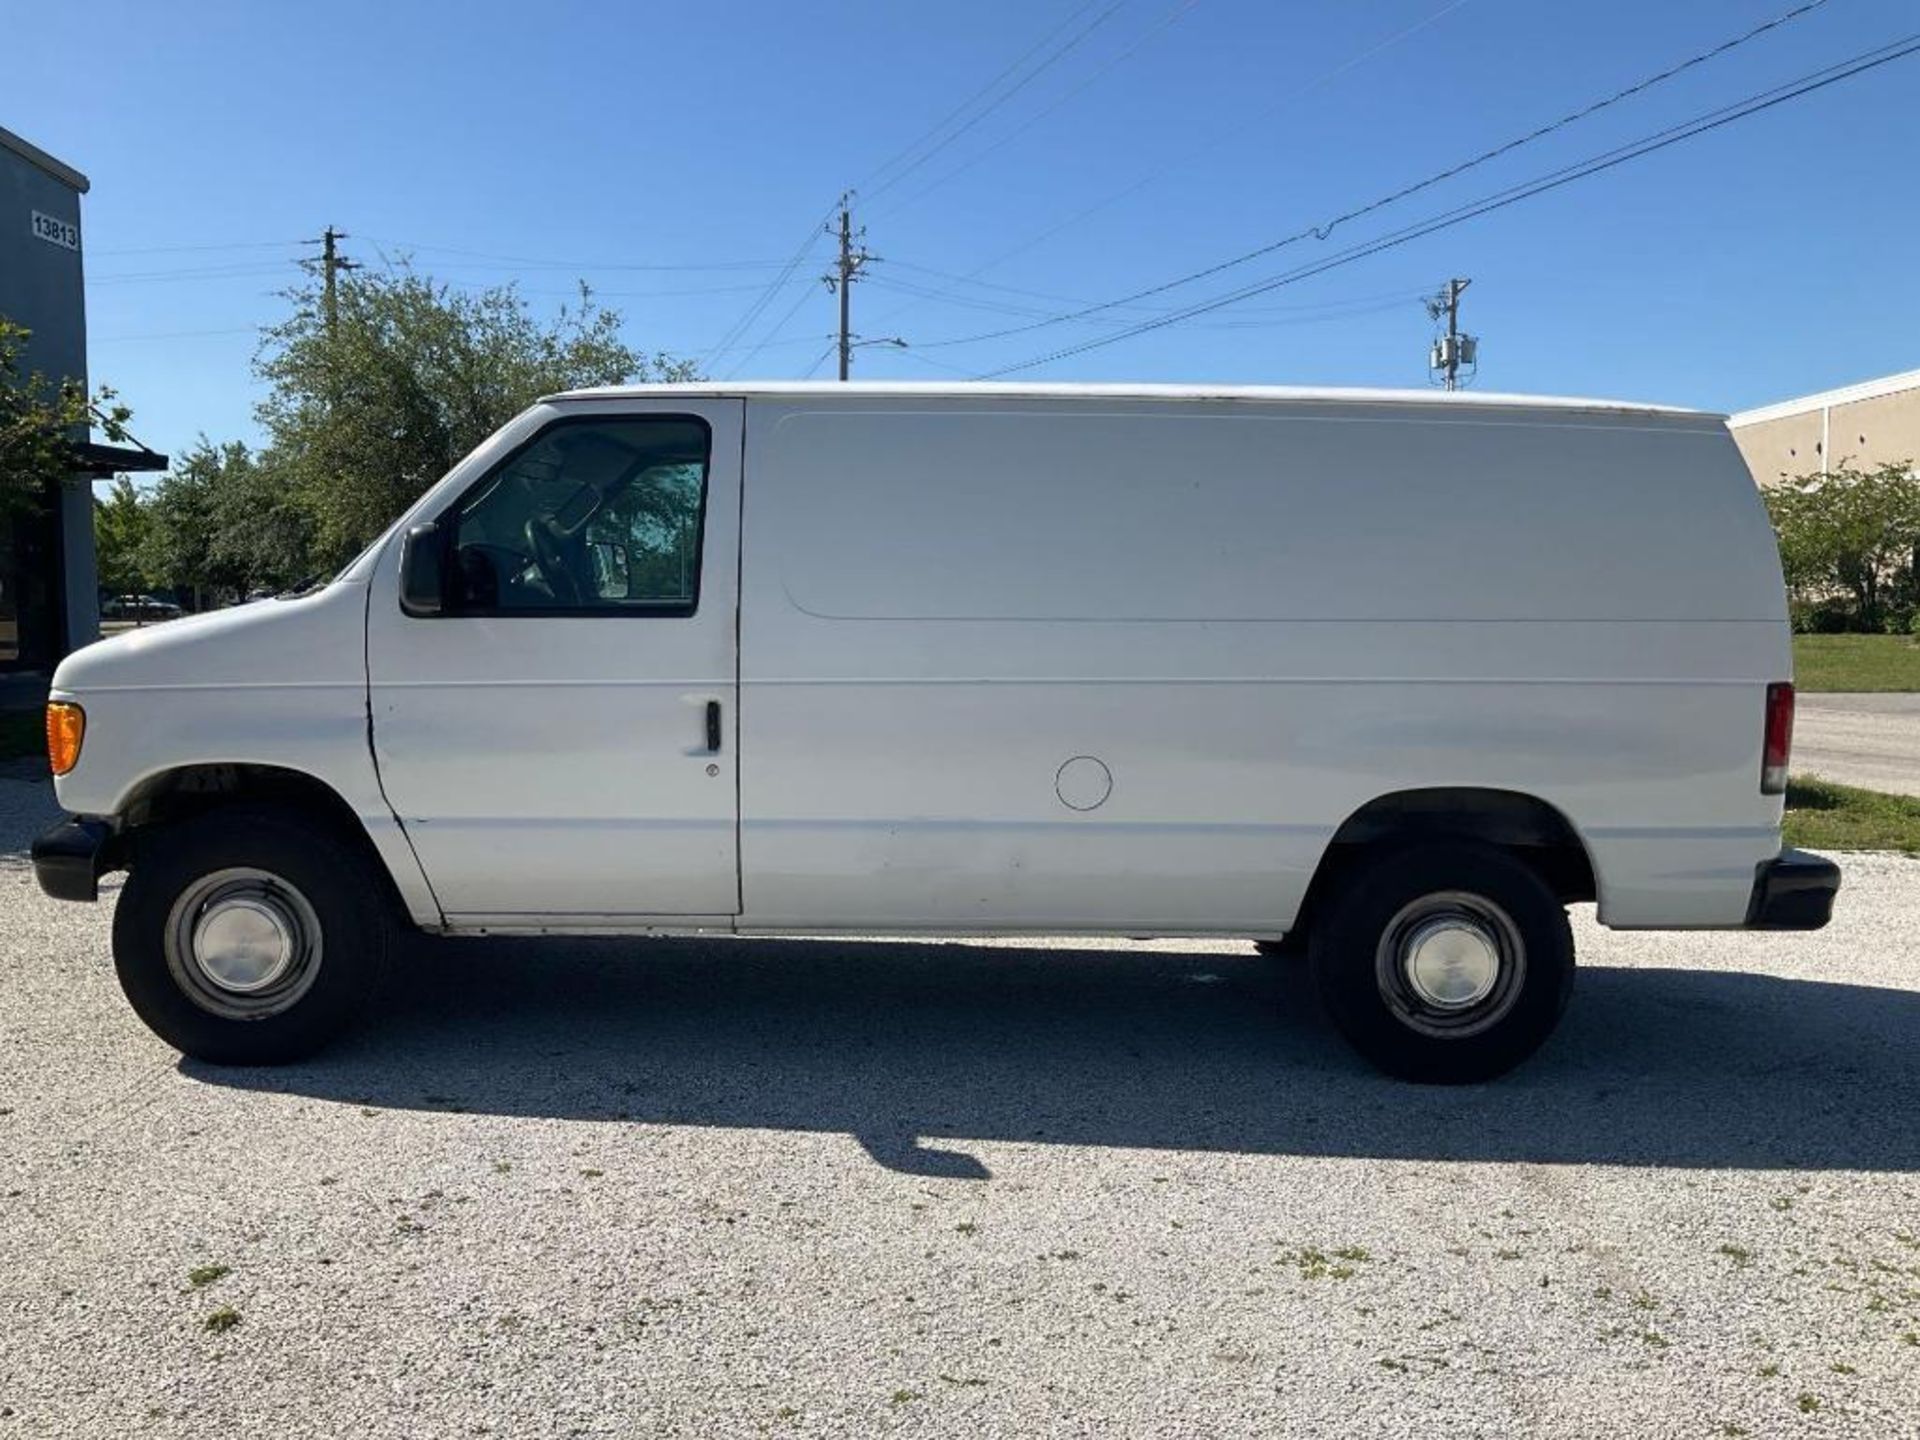 2003 FORD E-SERIES CARGO VAN, APPROX GVWR 8600LBS, STORAGE UNIT & SHELVES IN BACK , RUNS & DRIVES - Image 3 of 28